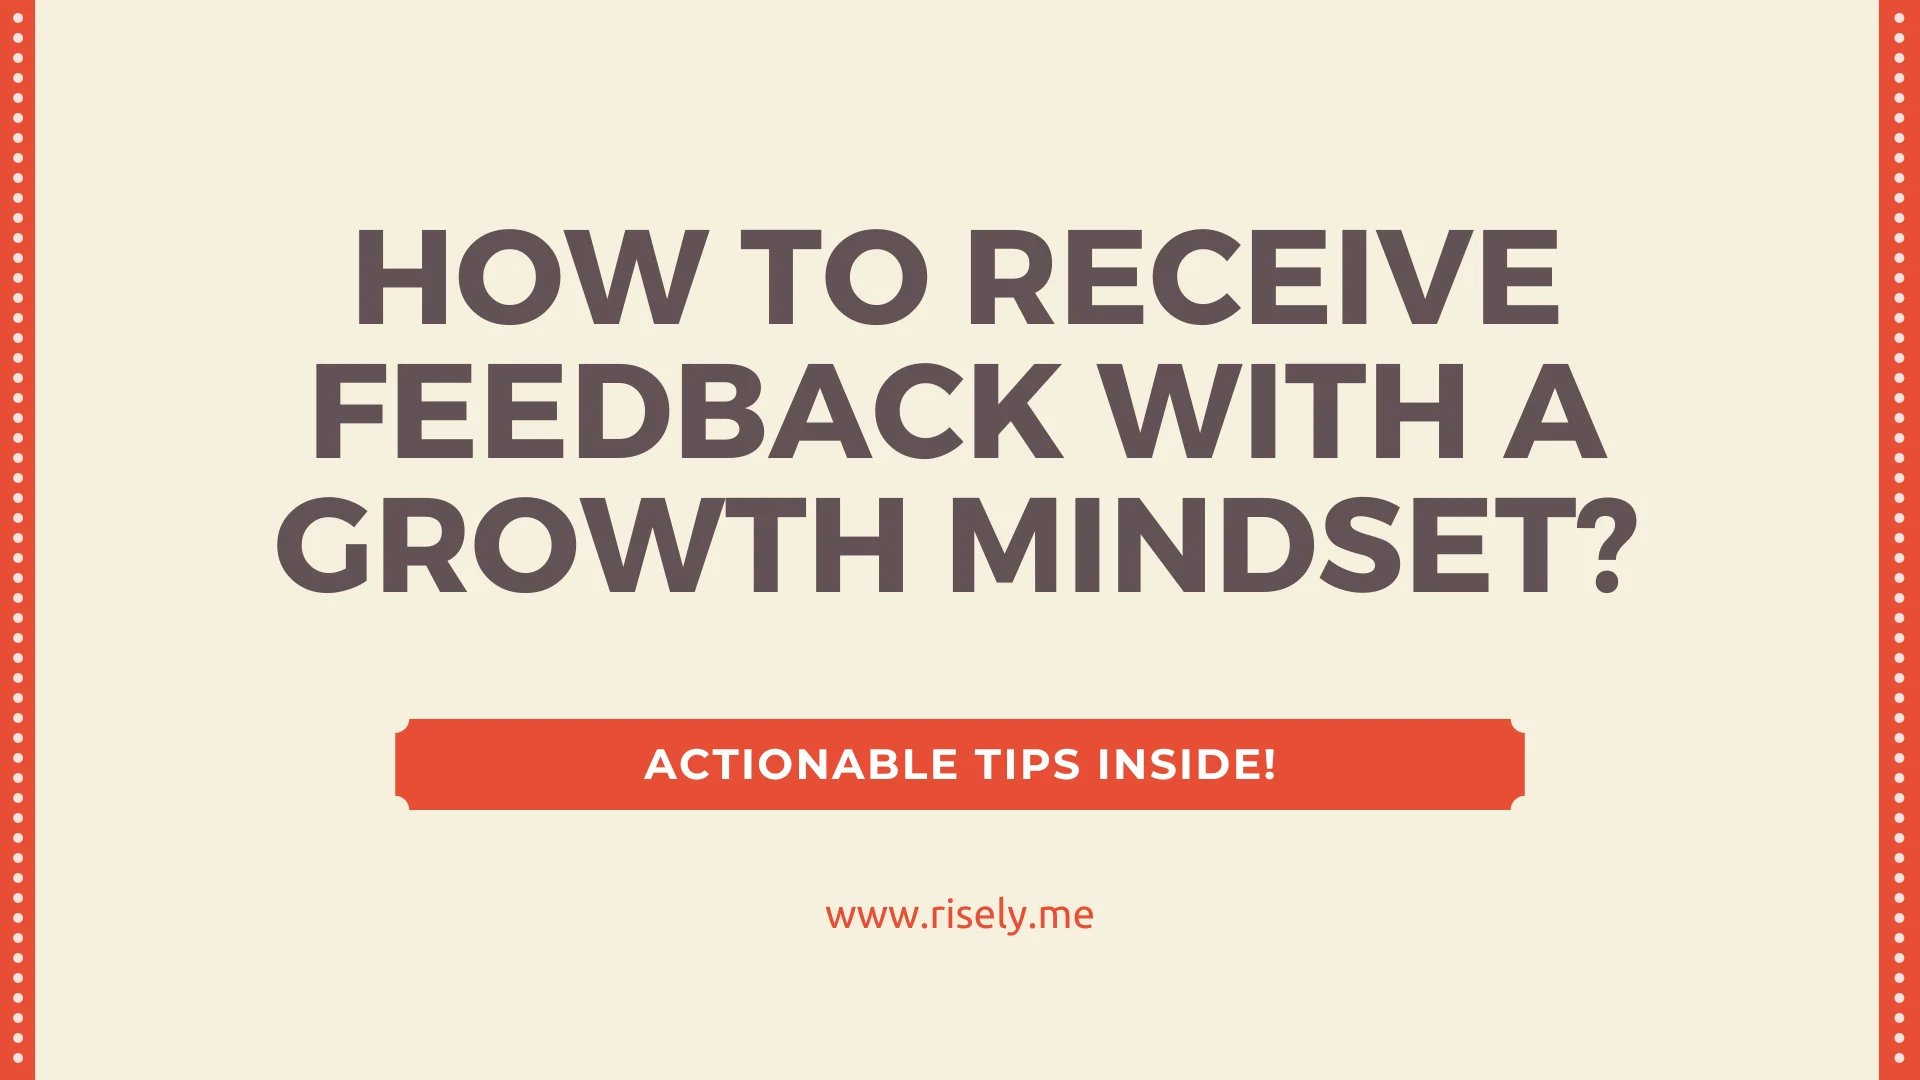 How To Receive Feedback With A Growth Mindset?